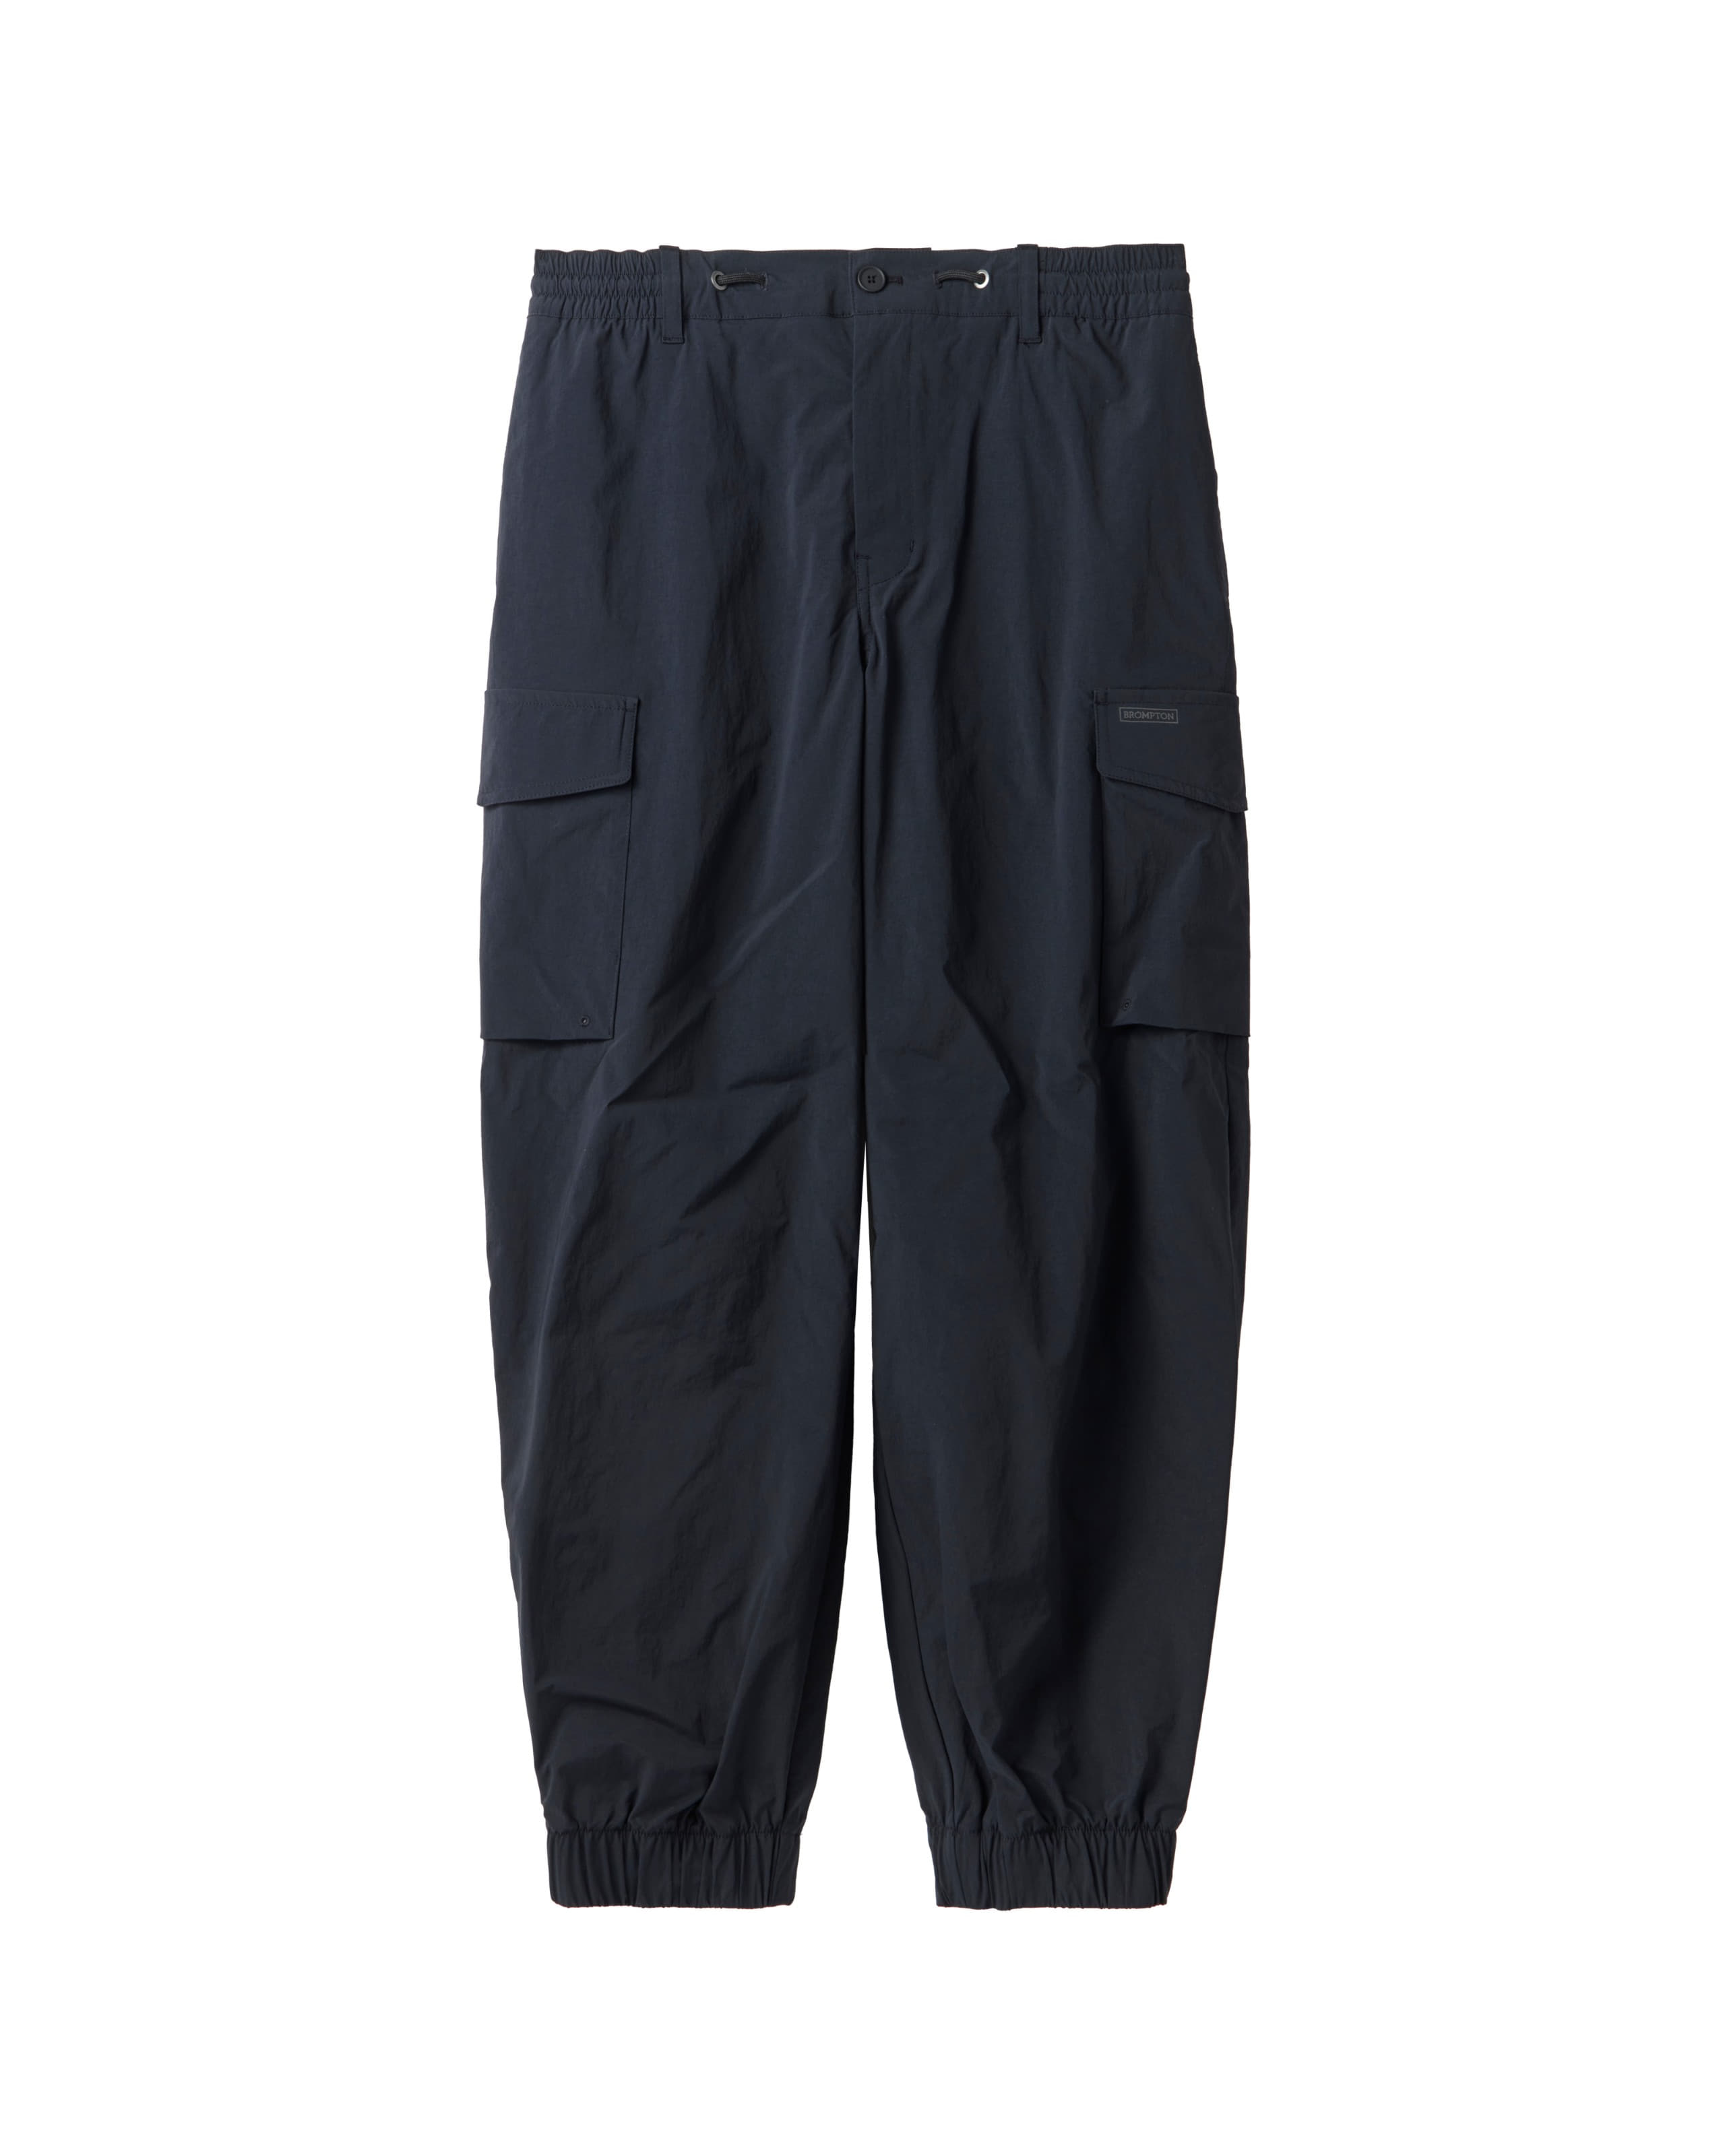 CARGO JOGGER TROUSERS - BLACK